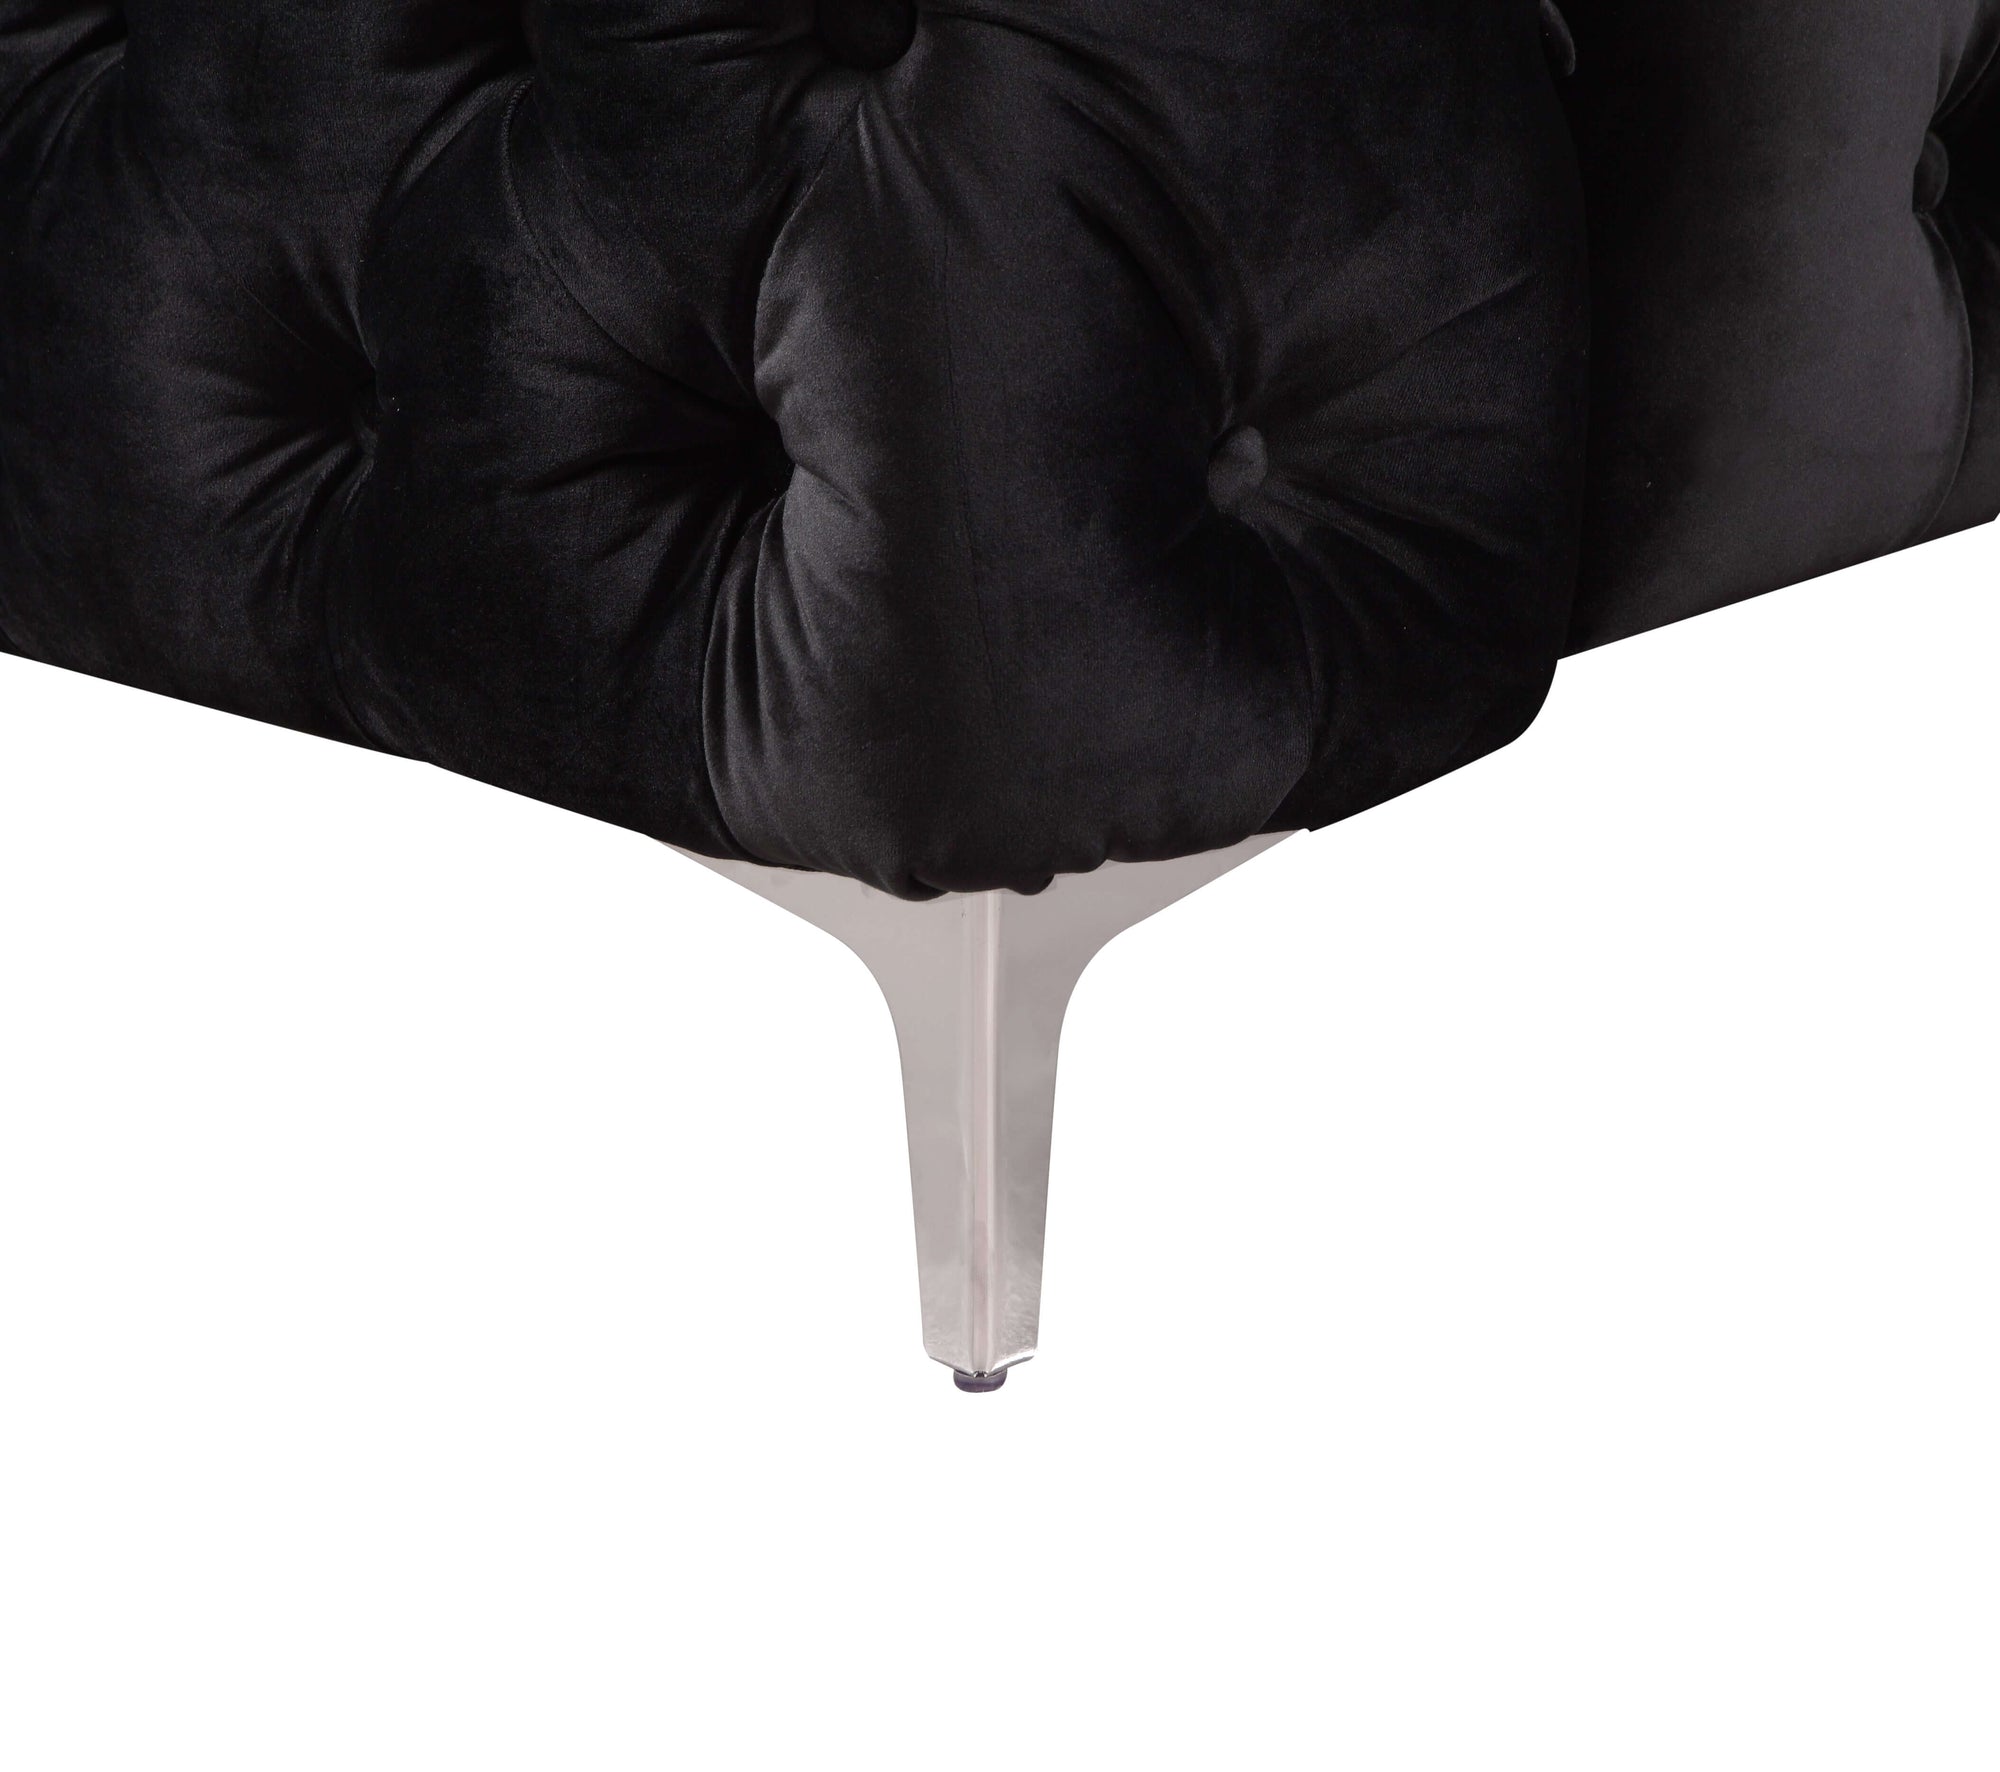 2 Seater Sofa Classic Button Tufted Lounge in Black Velvet Fabric with Metal Legs-Upinteriors